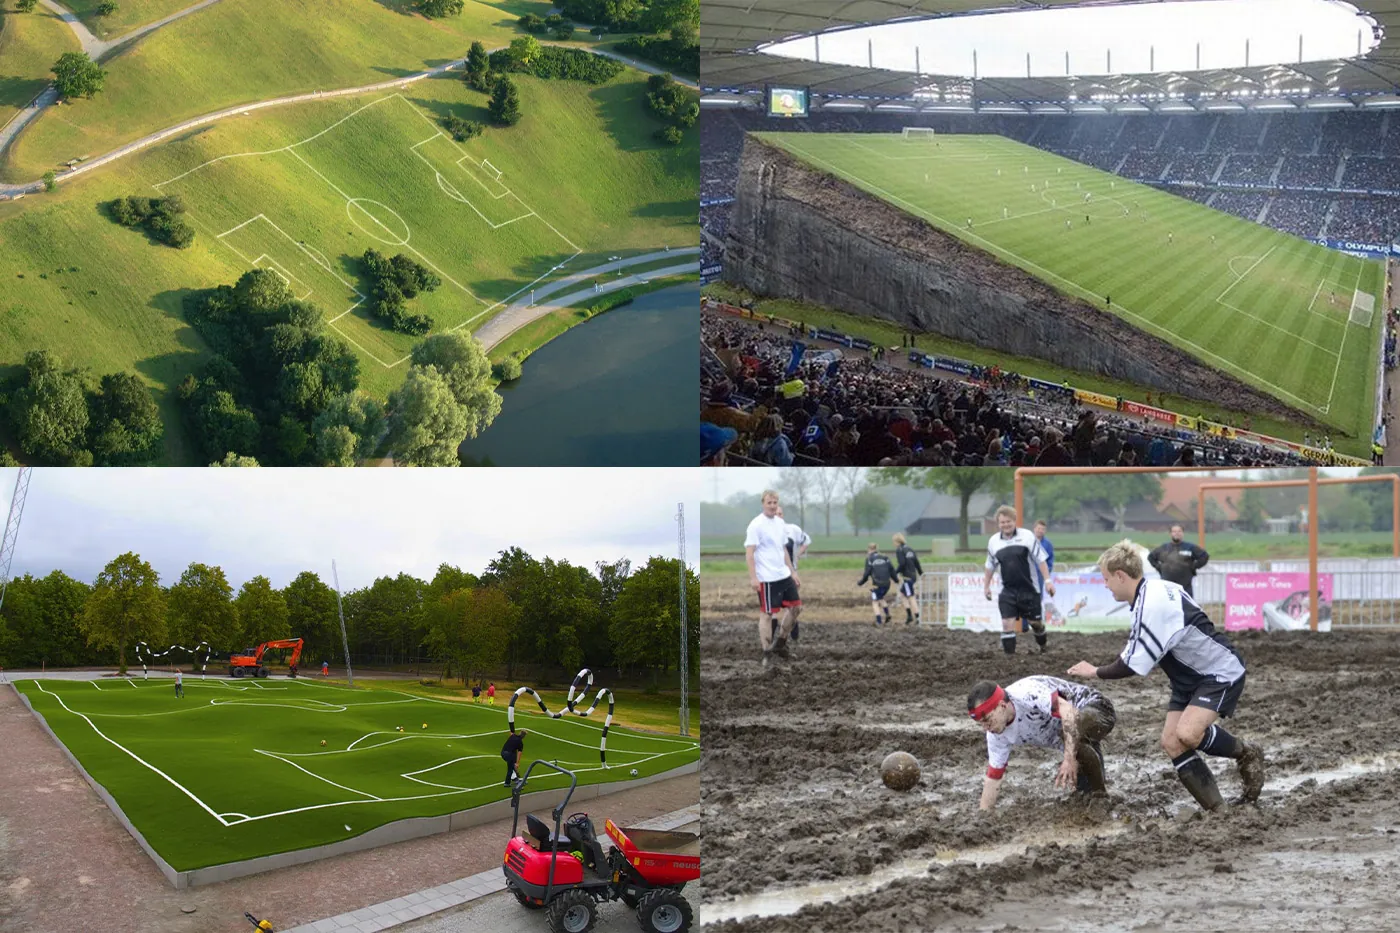 Four images showing different soccer fields that are almost impossible to play on, because they are on hills, very uneven or muddy